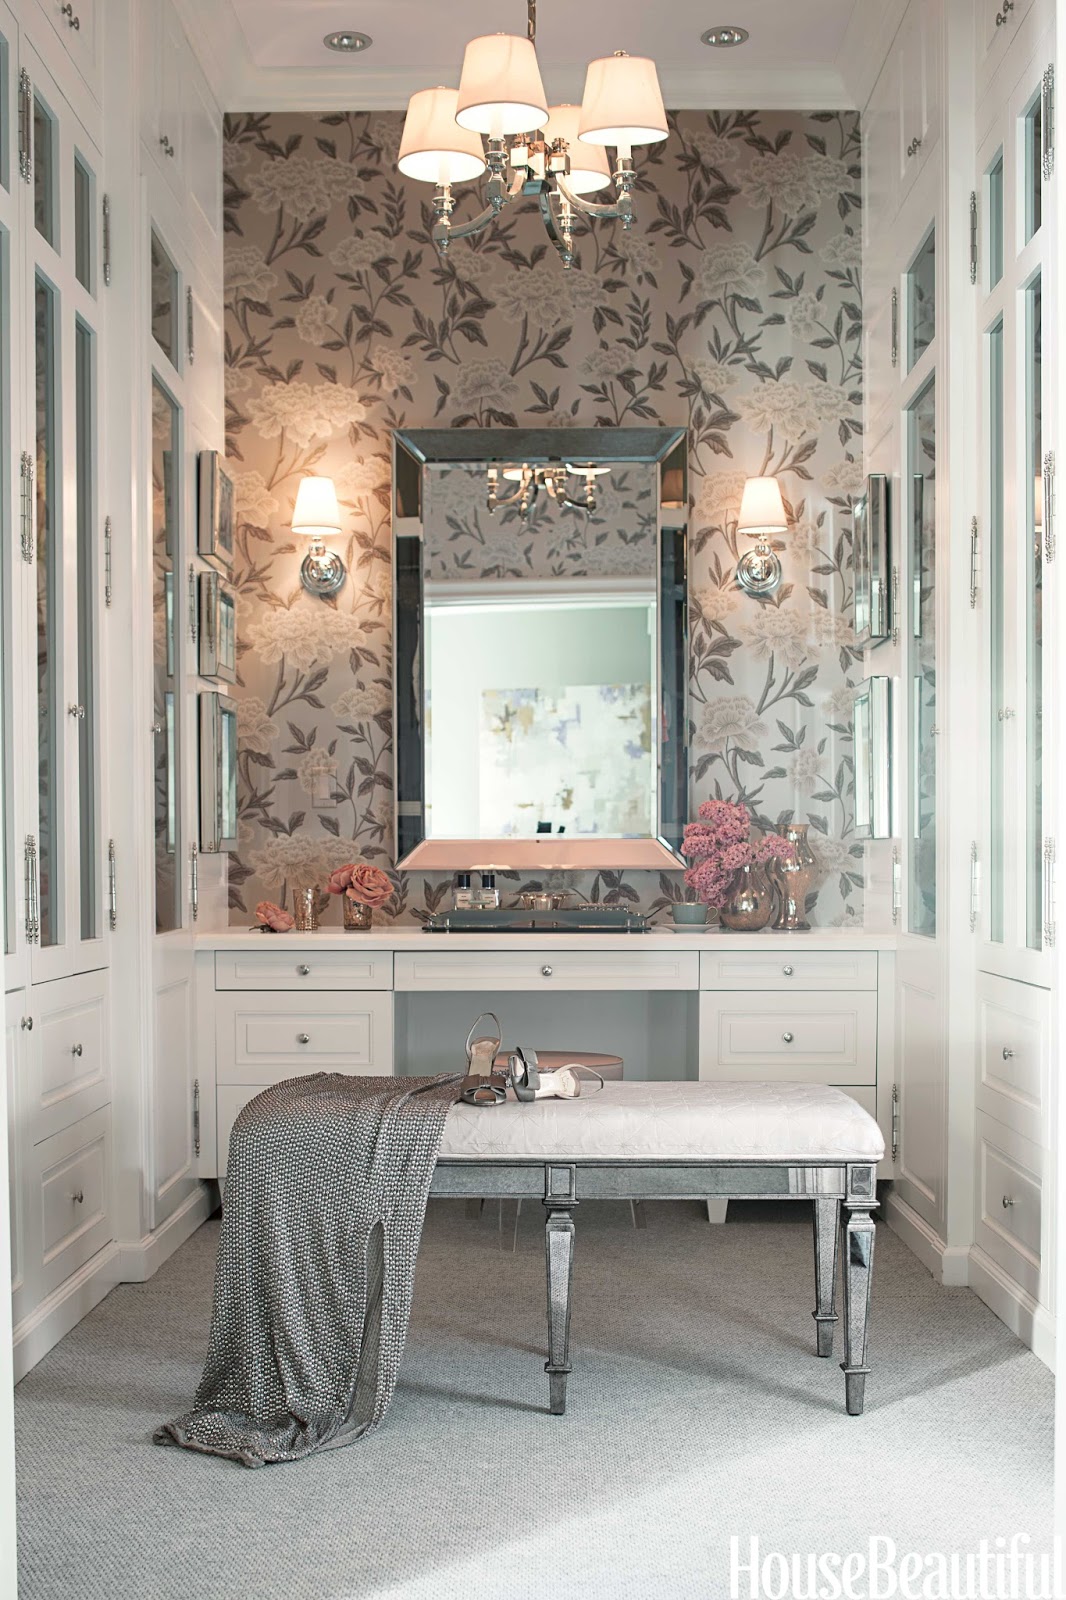 Wallpaper And Mirrored Accents Including A Lovely Upholstered